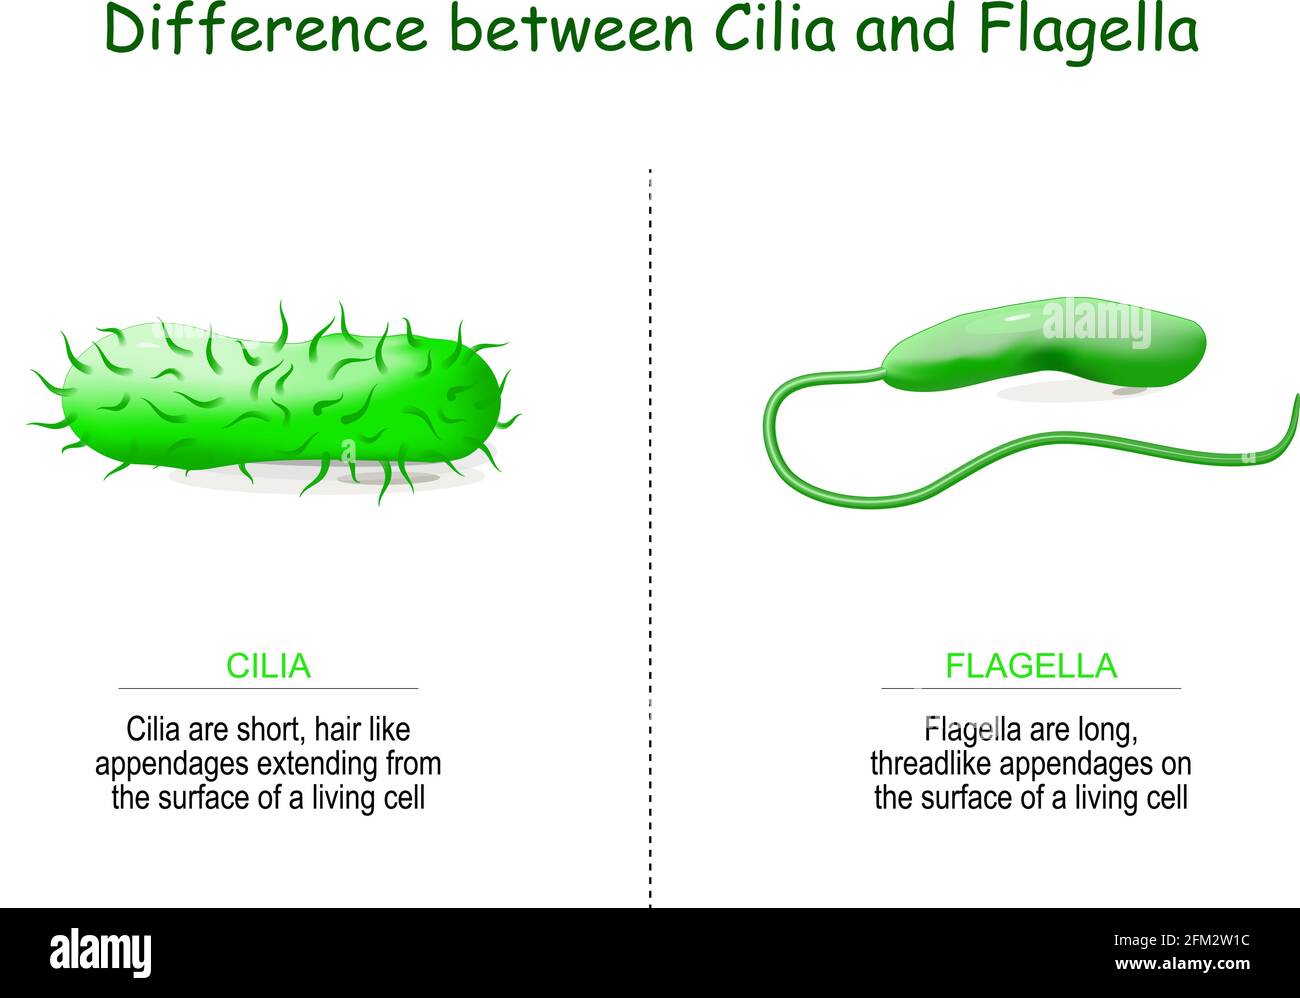 Difference between cilia and flagella for bacteria. Vector illustration Stock Vector